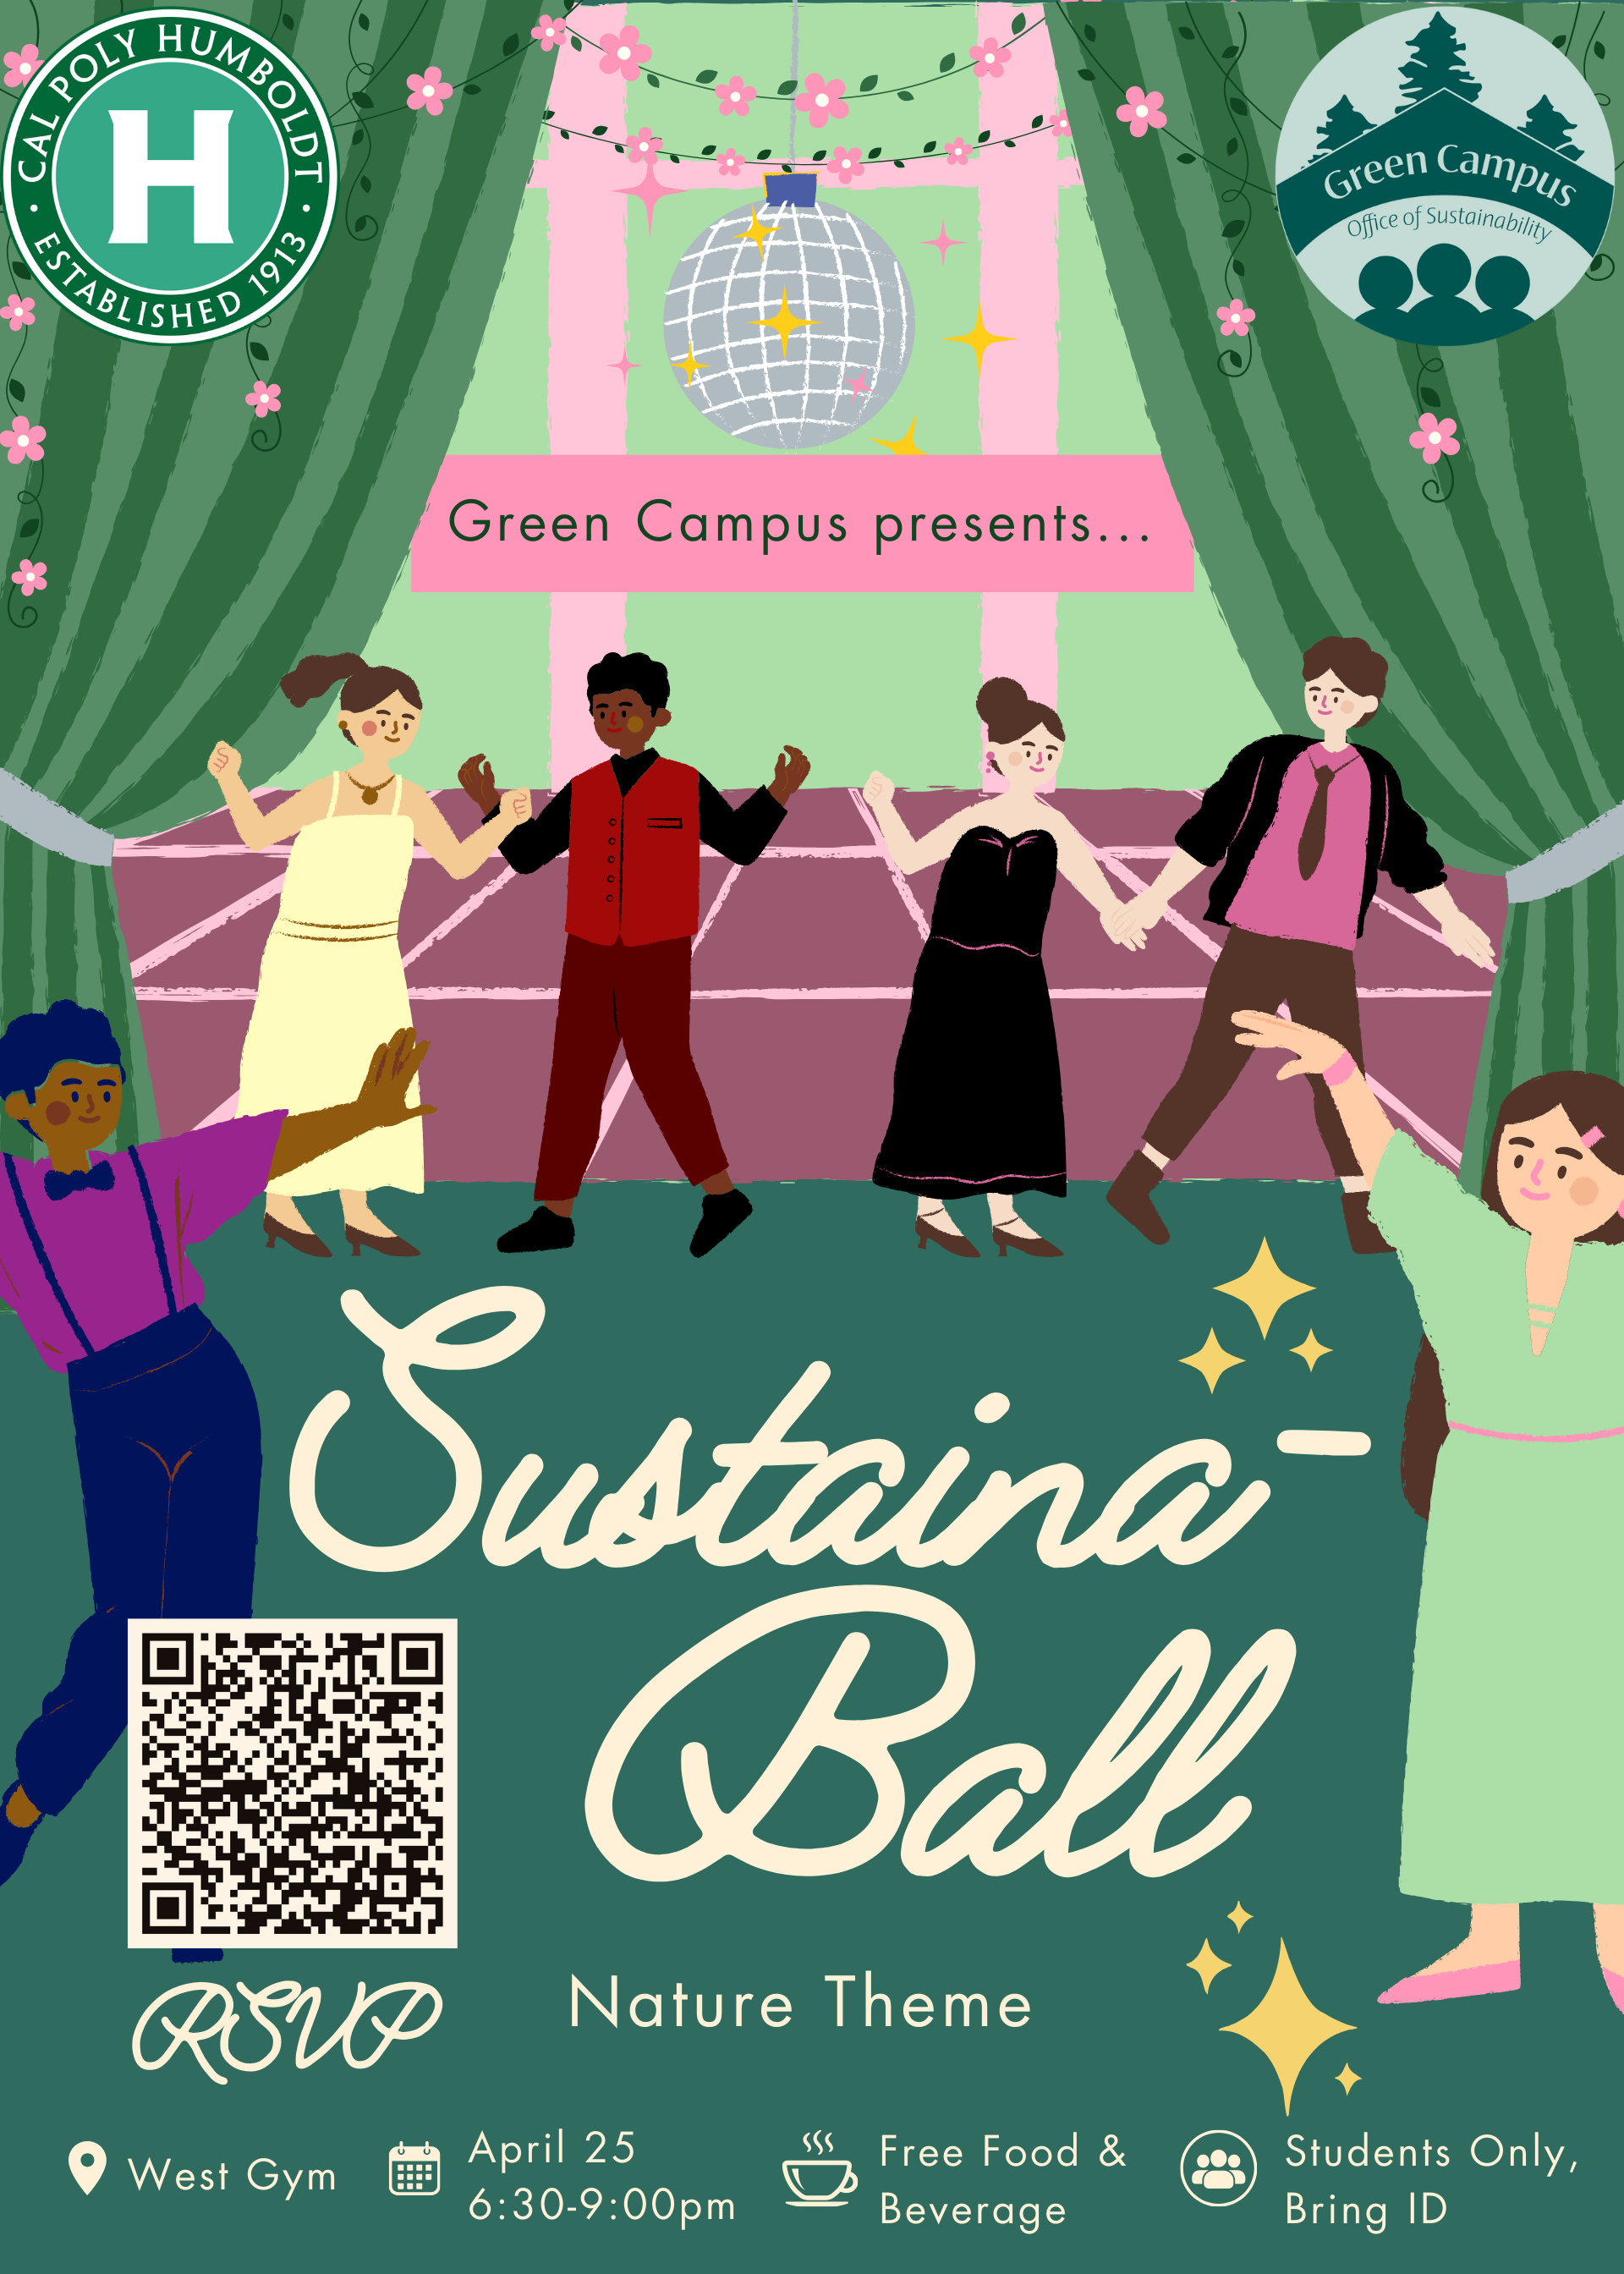 Flyer shows people dancing under a disco ball and shows the words "Sustaina-ball, Nature theme, West Gym, April 25 6:30- 9pm Free food & beverage, students only bring ID"